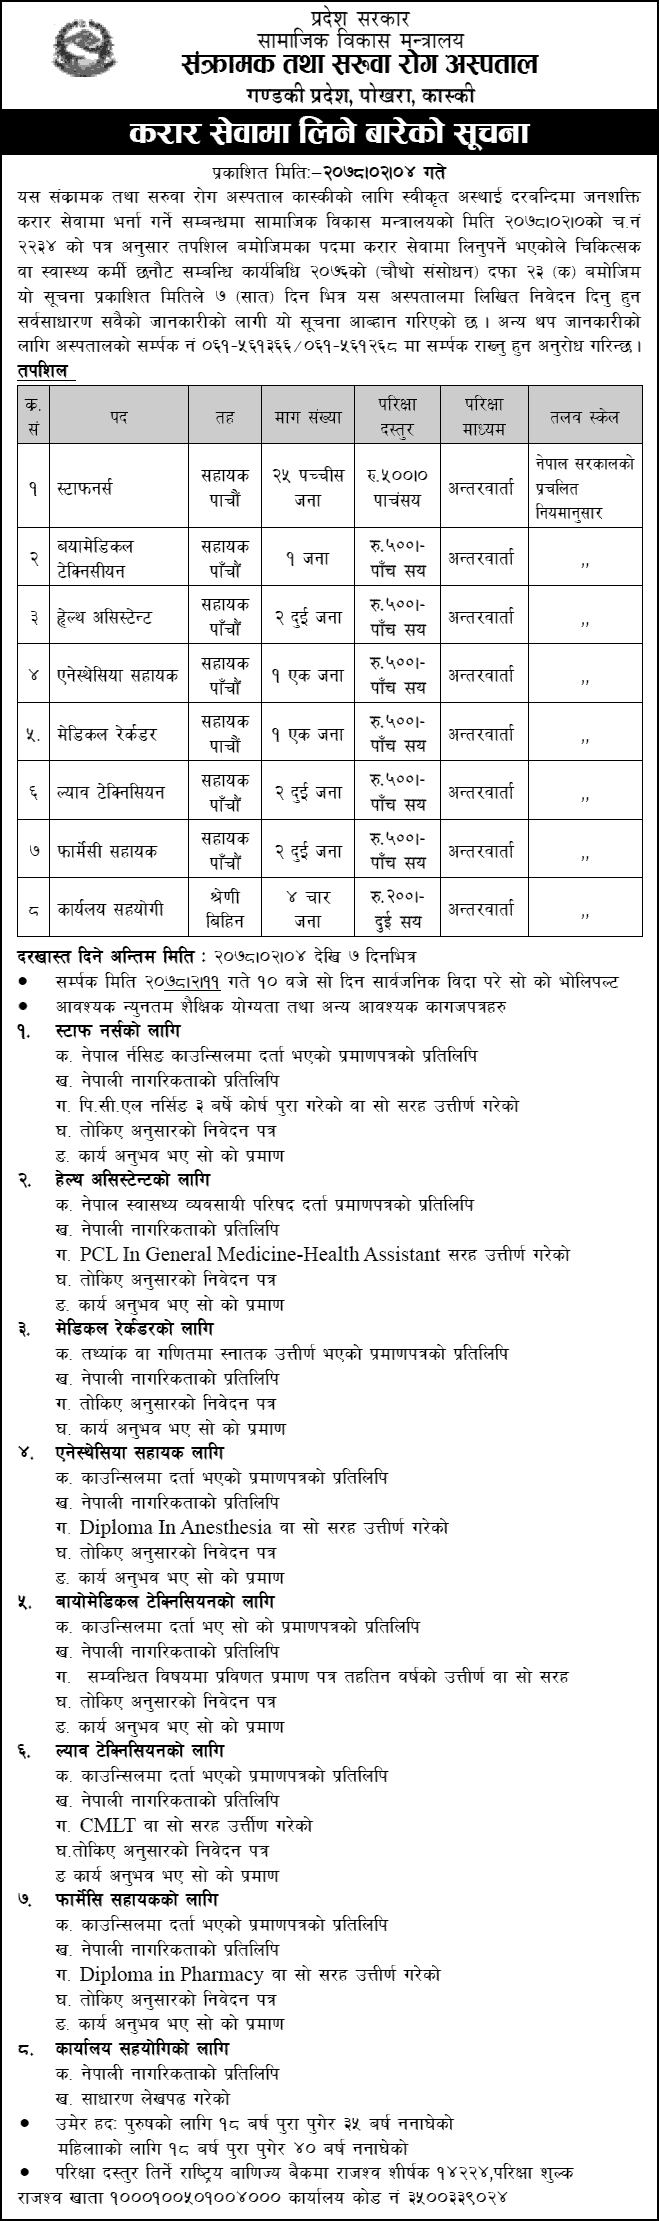 Vacancy Announcement Infectious and Communicable Diseases Hospital Pokhara